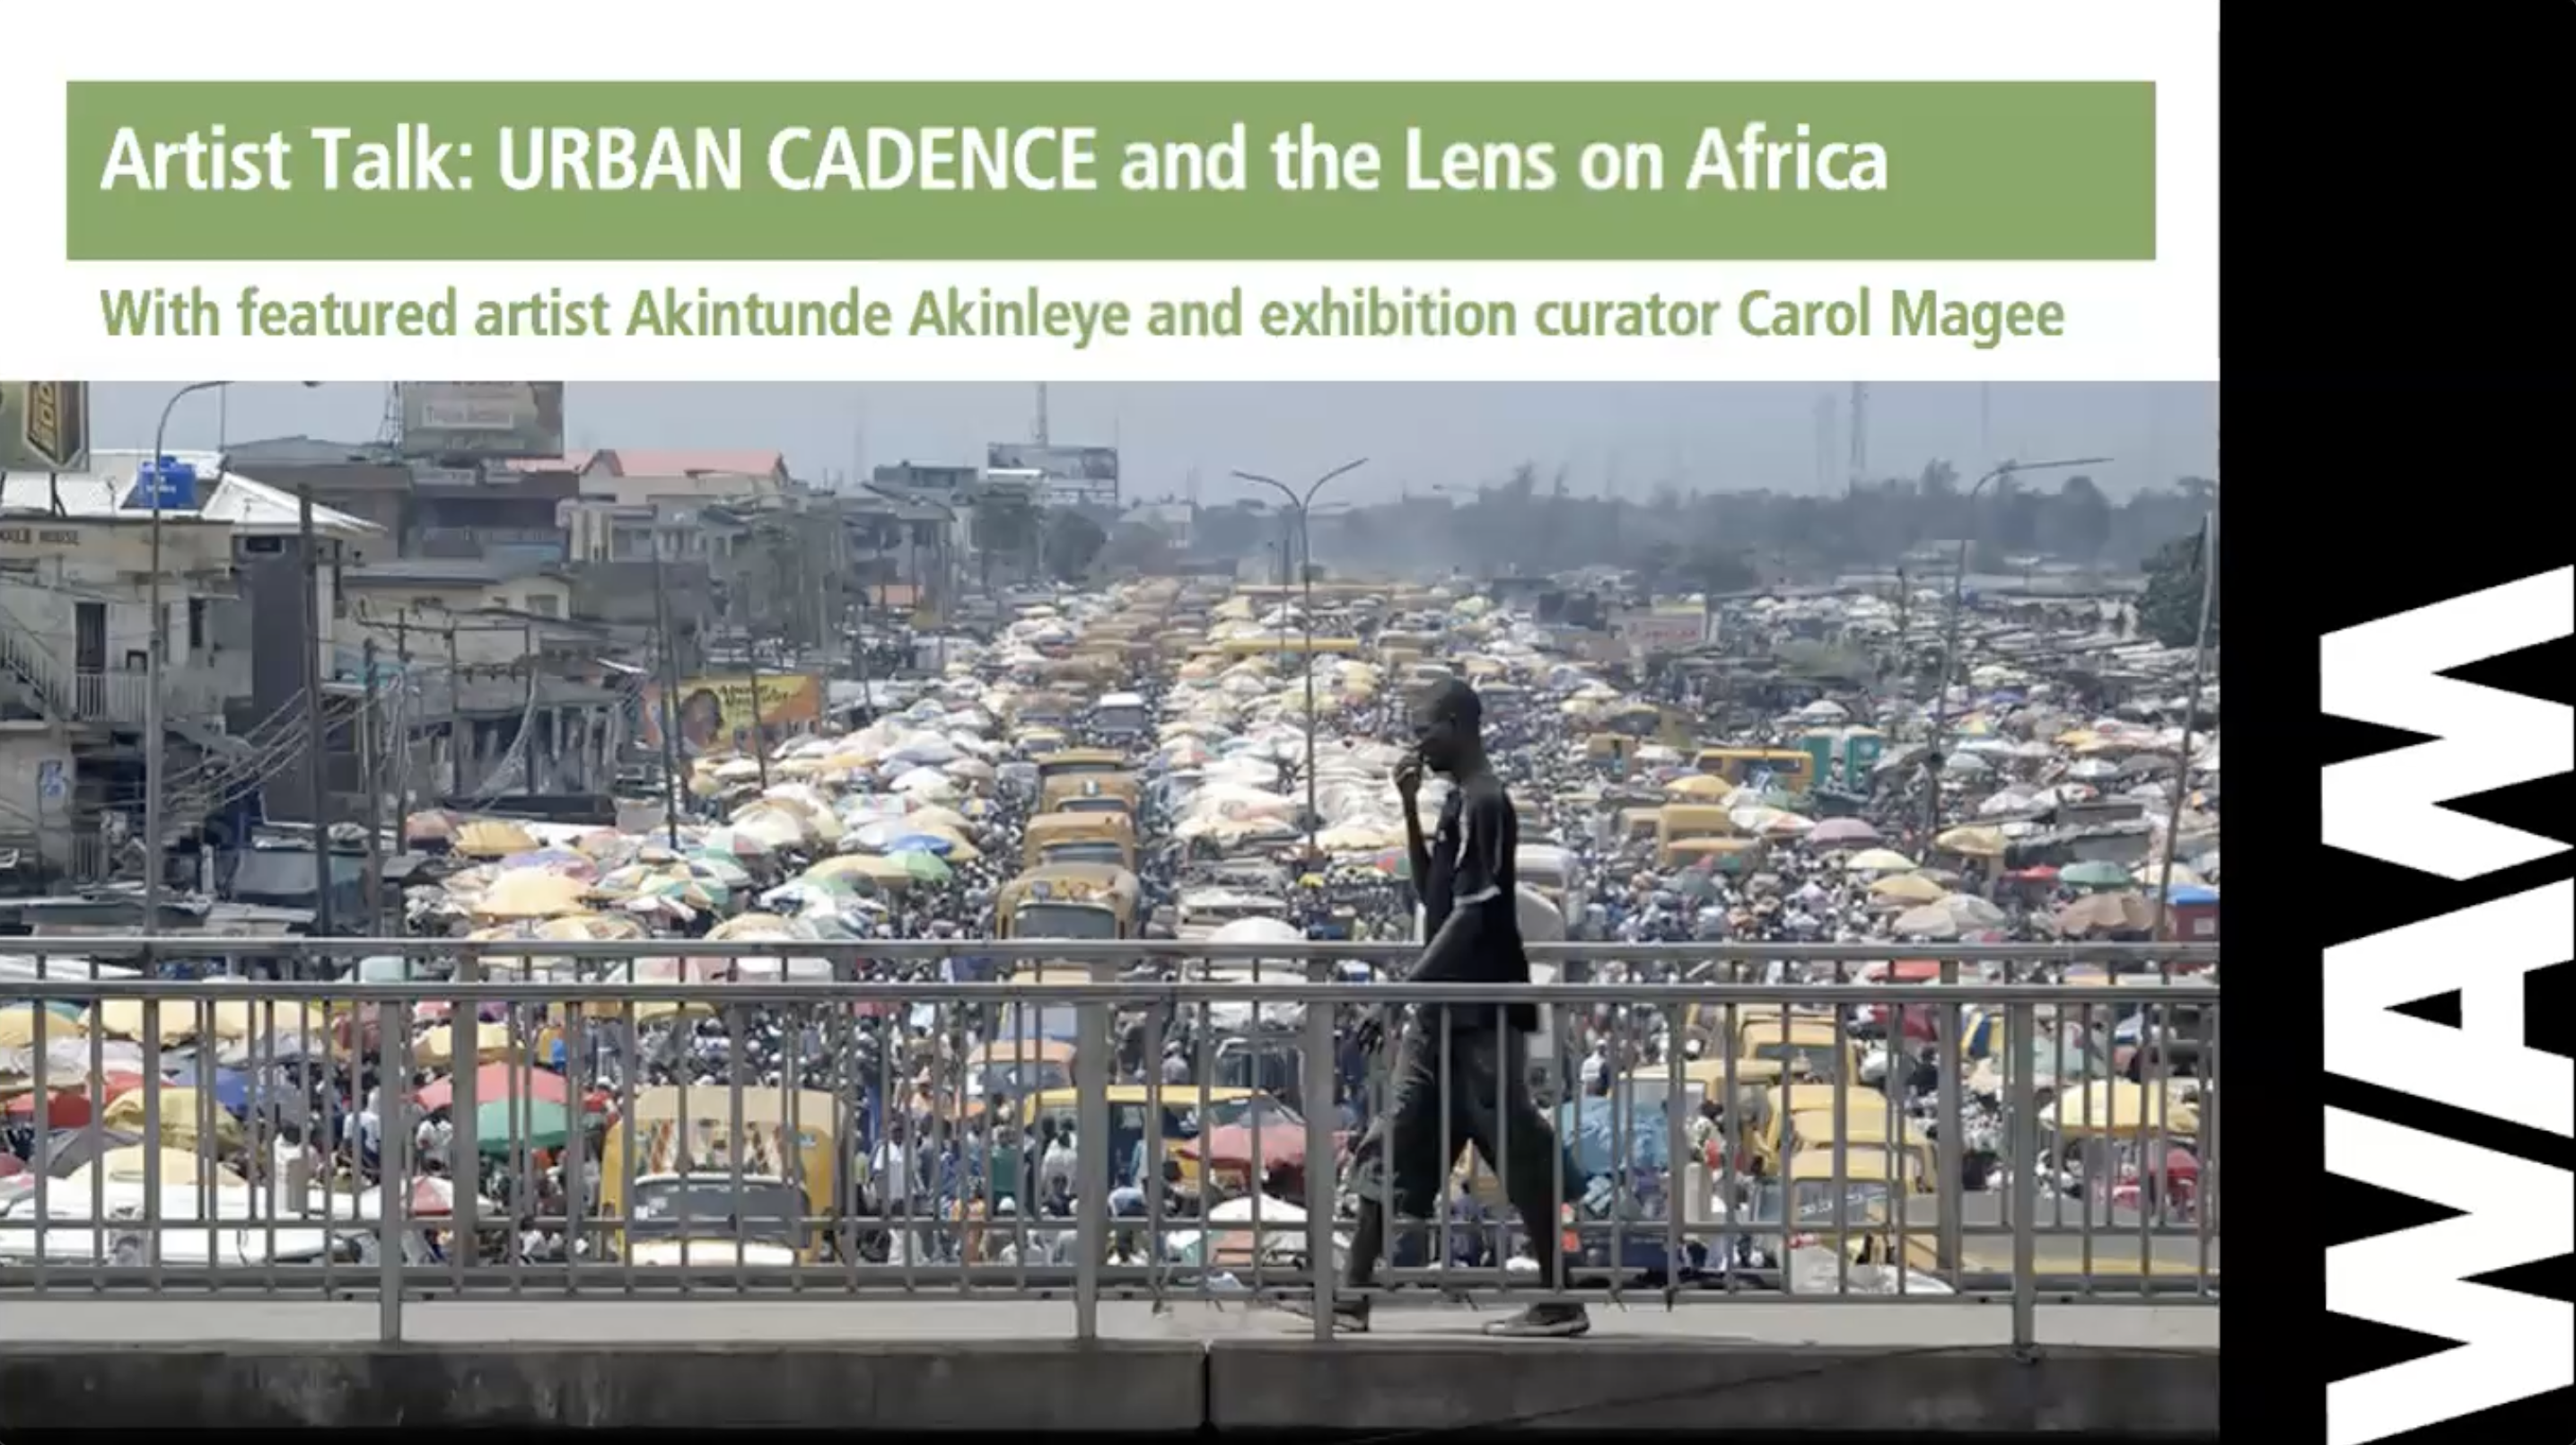 Artist Talk: Urban Cadence and the Lens on Africa with artist Akintunde Akinleye and curator Carol Magee